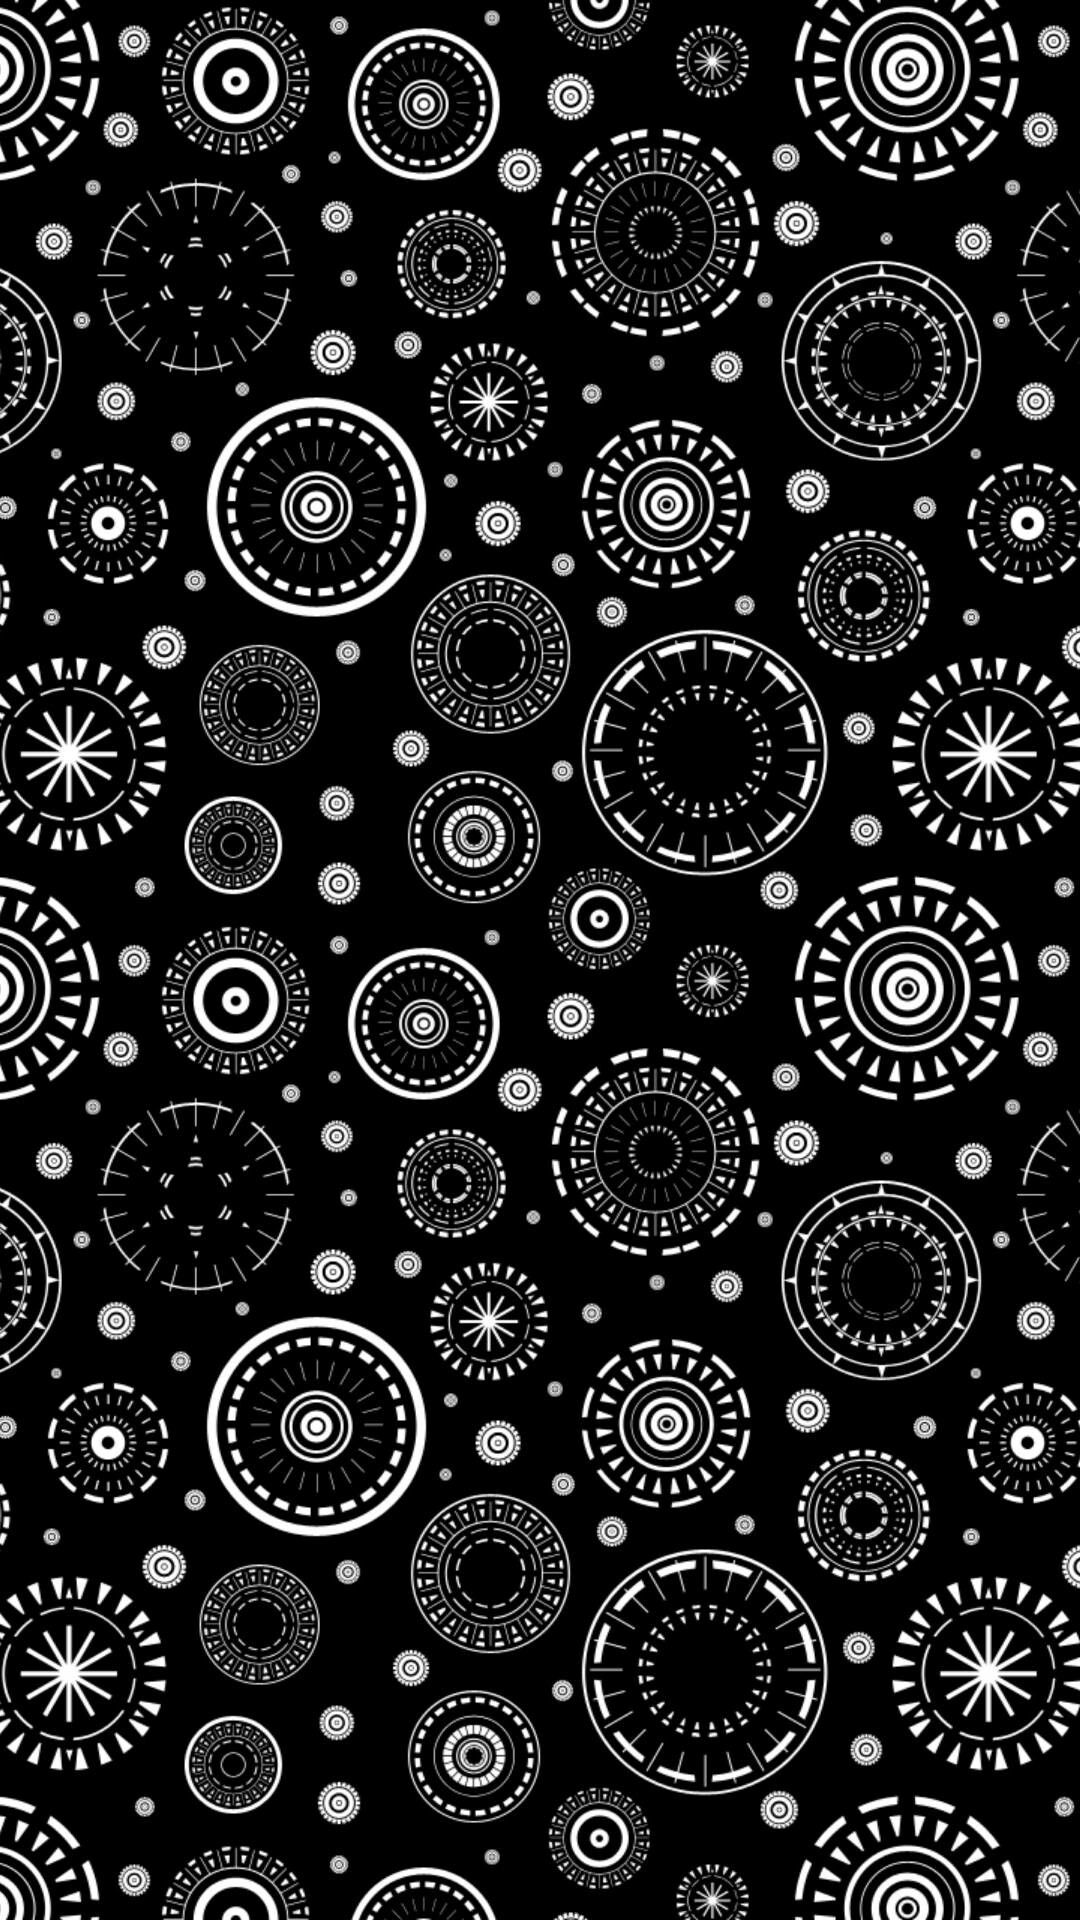 Black and white. Pattern wallpaper, Black and grey wallpaper, Wallpaper design pattern